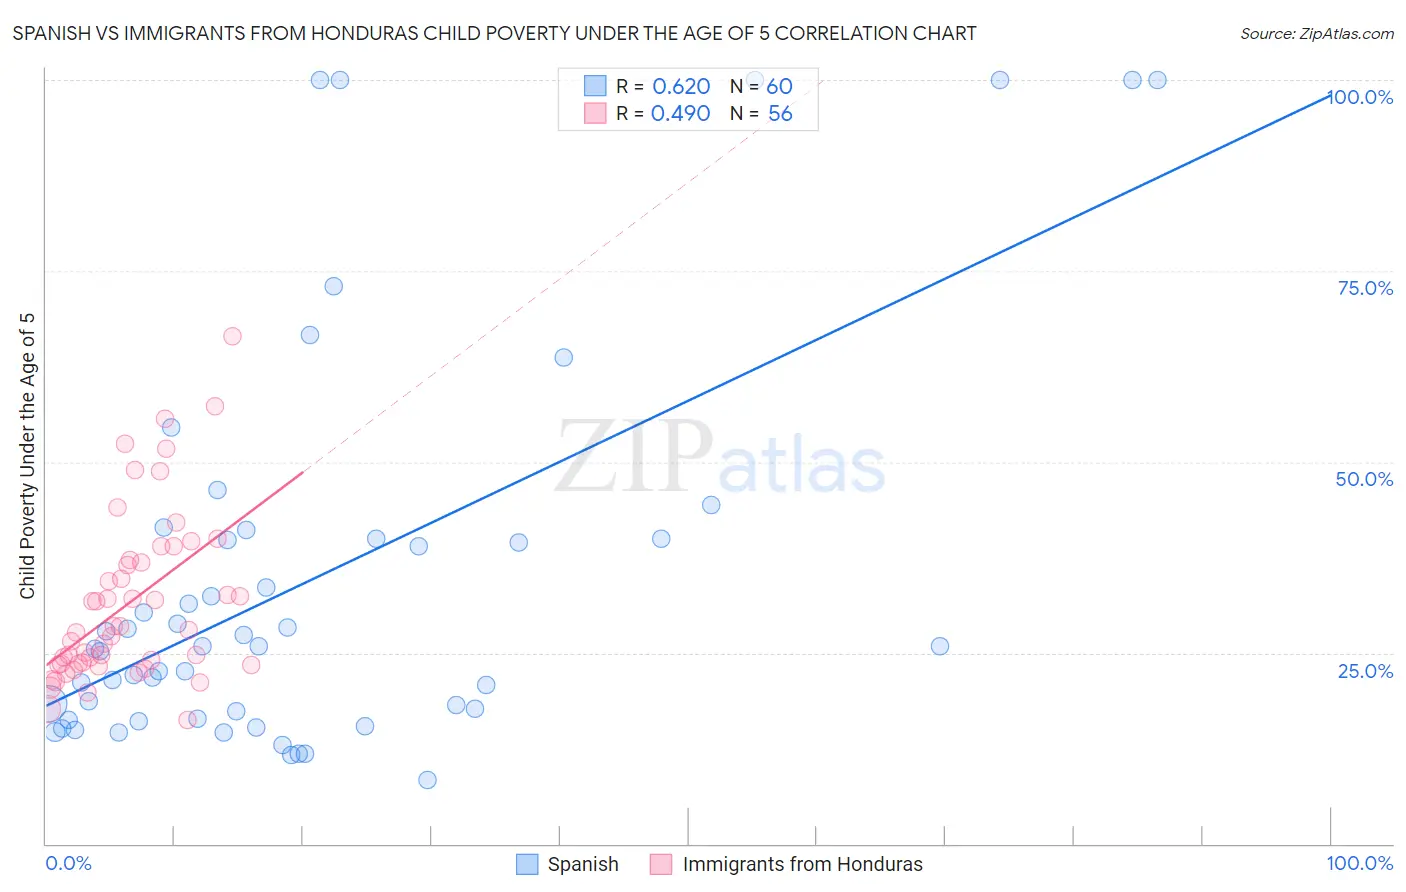 Spanish vs Immigrants from Honduras Child Poverty Under the Age of 5